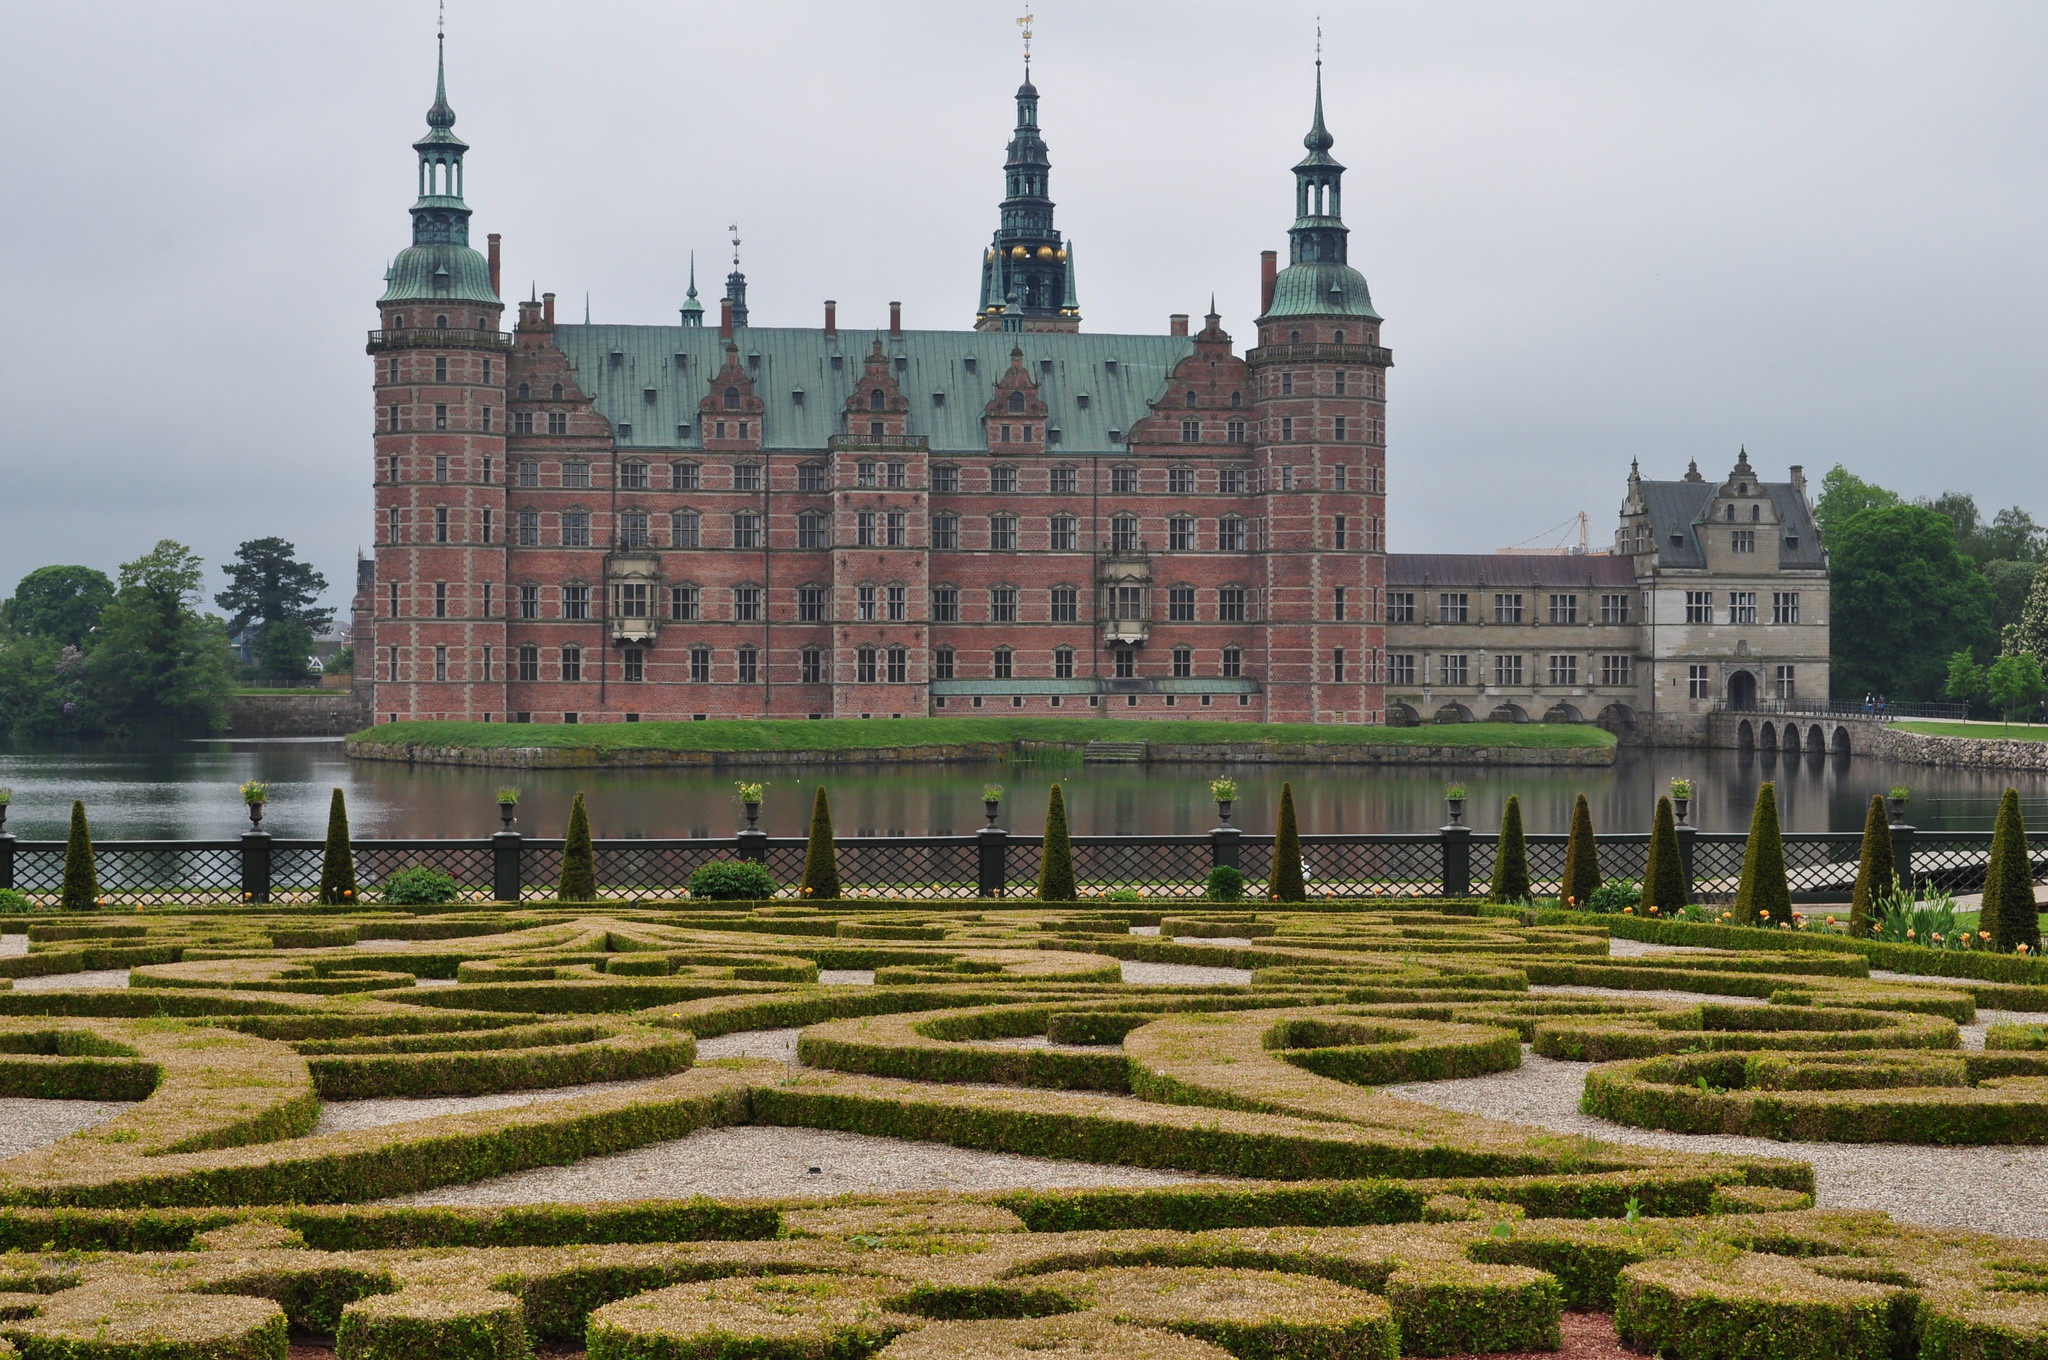 <p>Frederiksborg Castle was built by King Christian IV to symbolize his power as the king of both Denmark and Norway. </p>  <p>For 100 years, it was home to the royal family, until <strong>a fire destroyed much of the castle</strong> in 1859.</p>